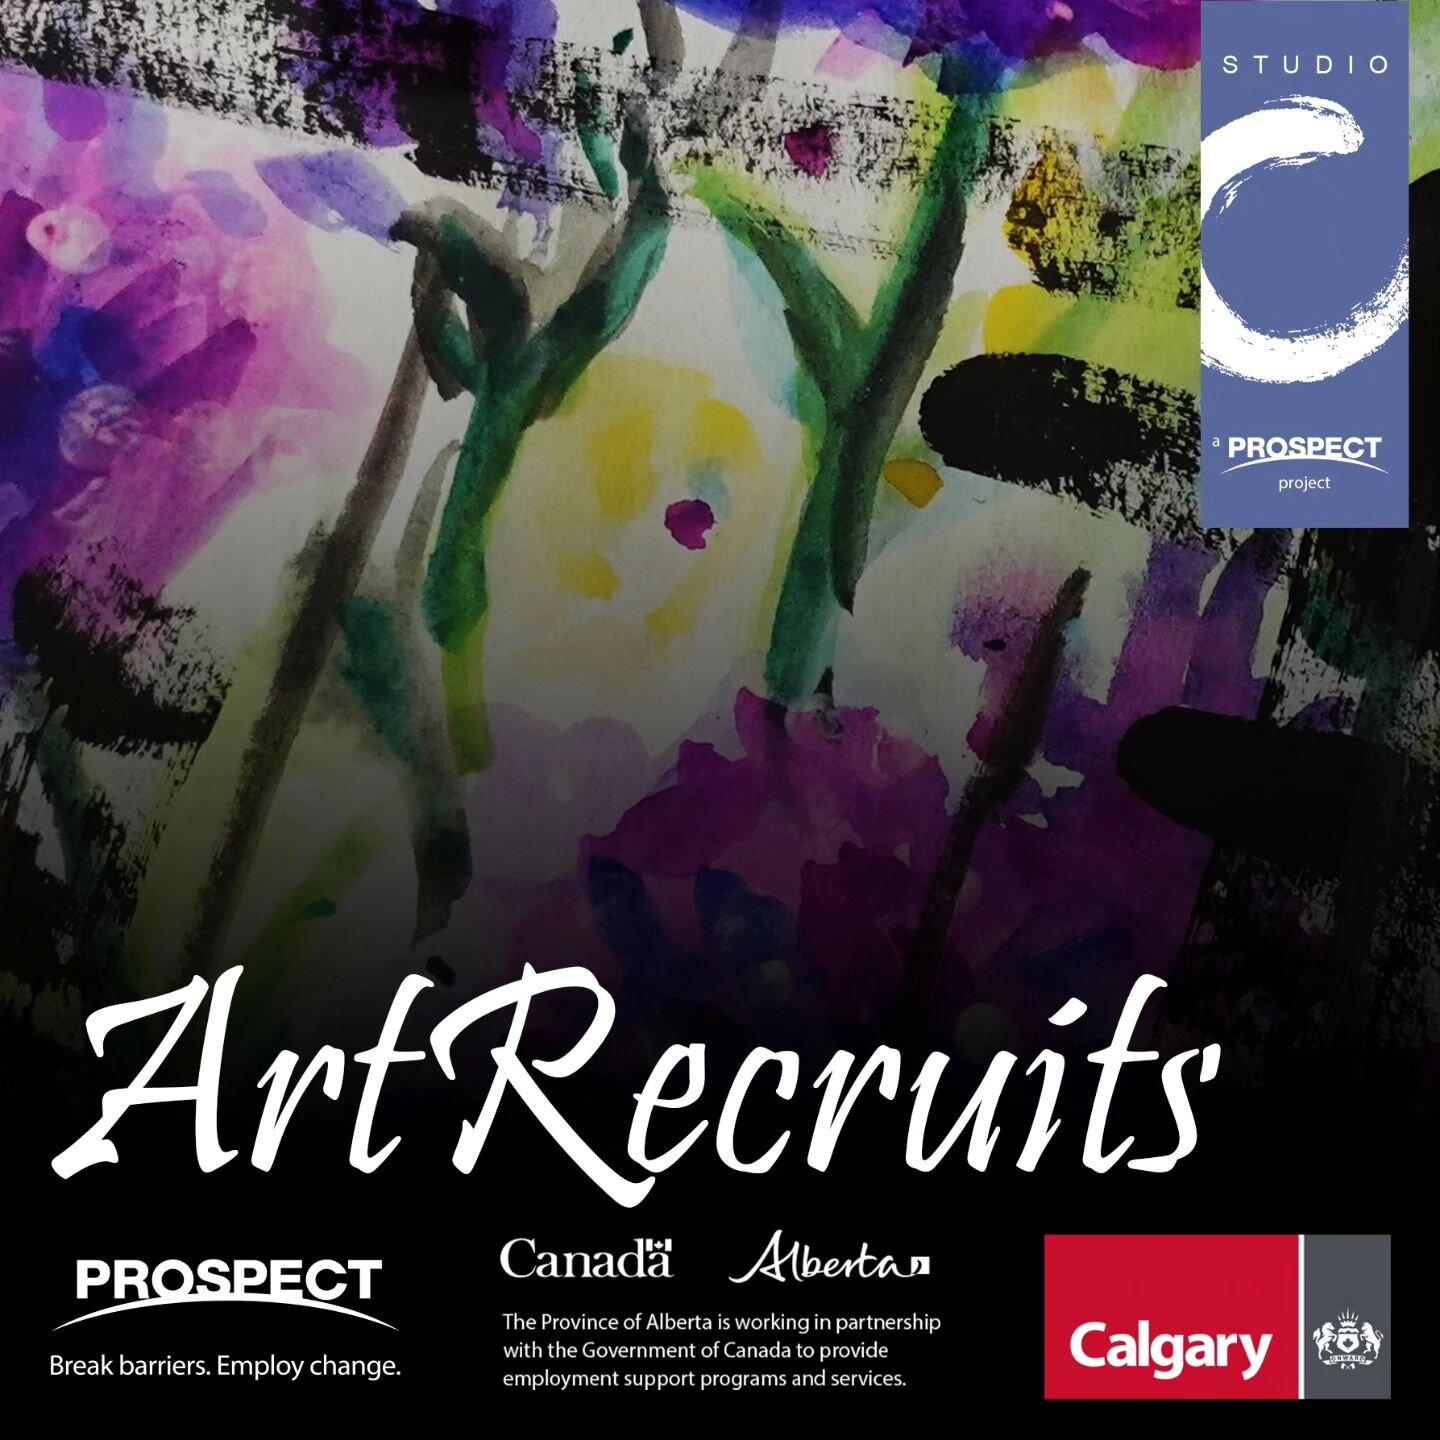 ArtRecruits exhibition coming up!!

ArtRecruits is an art-based workplace skill building program that teaches employment skills in the art studio rather than a classroom. The reception will be hosted by the Artists and Prospect Facilitators. The rece